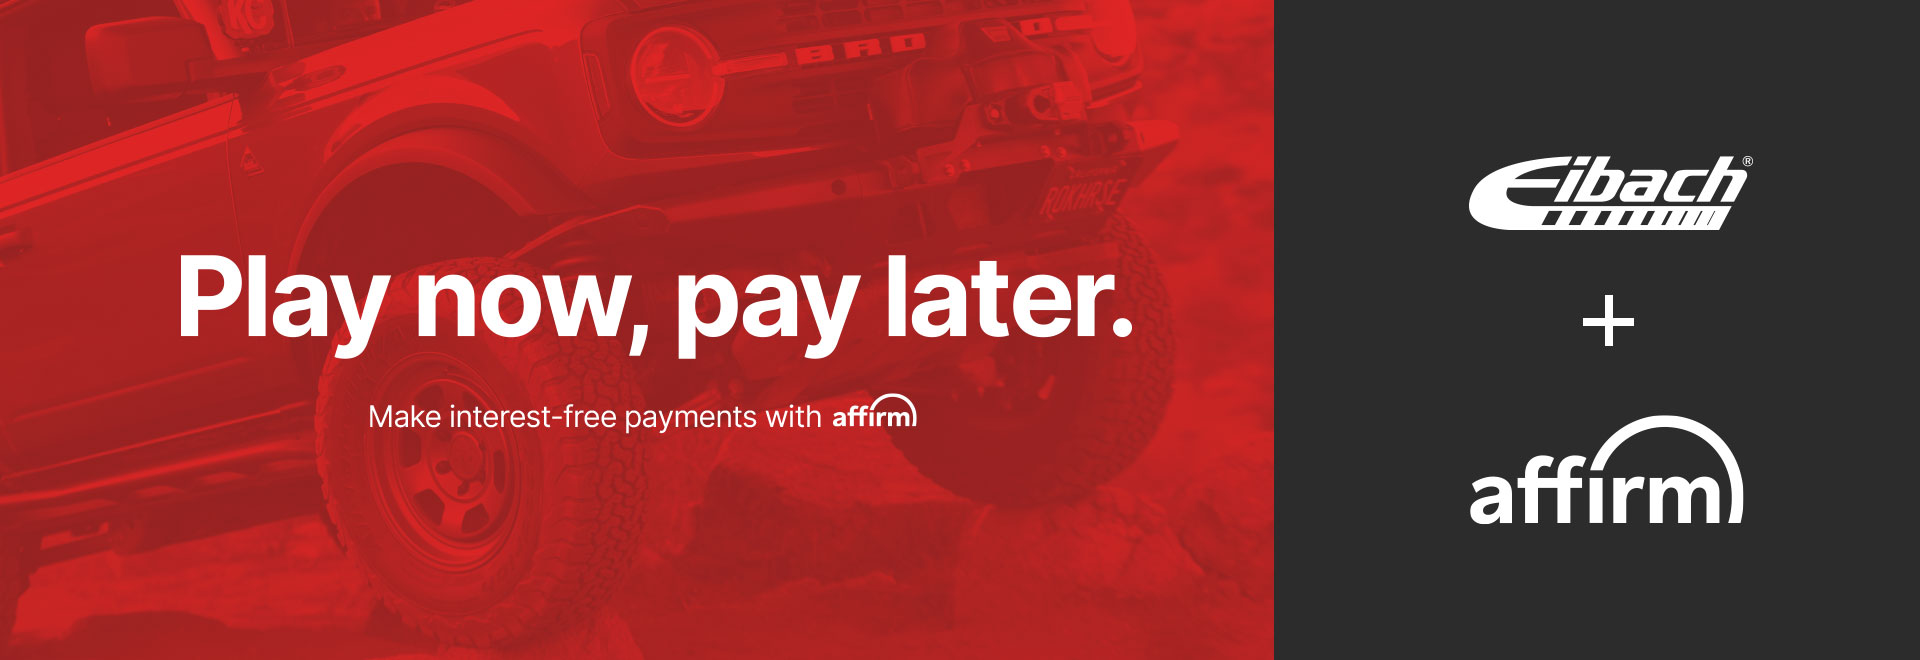 Play now, pay later with Affirm Financing